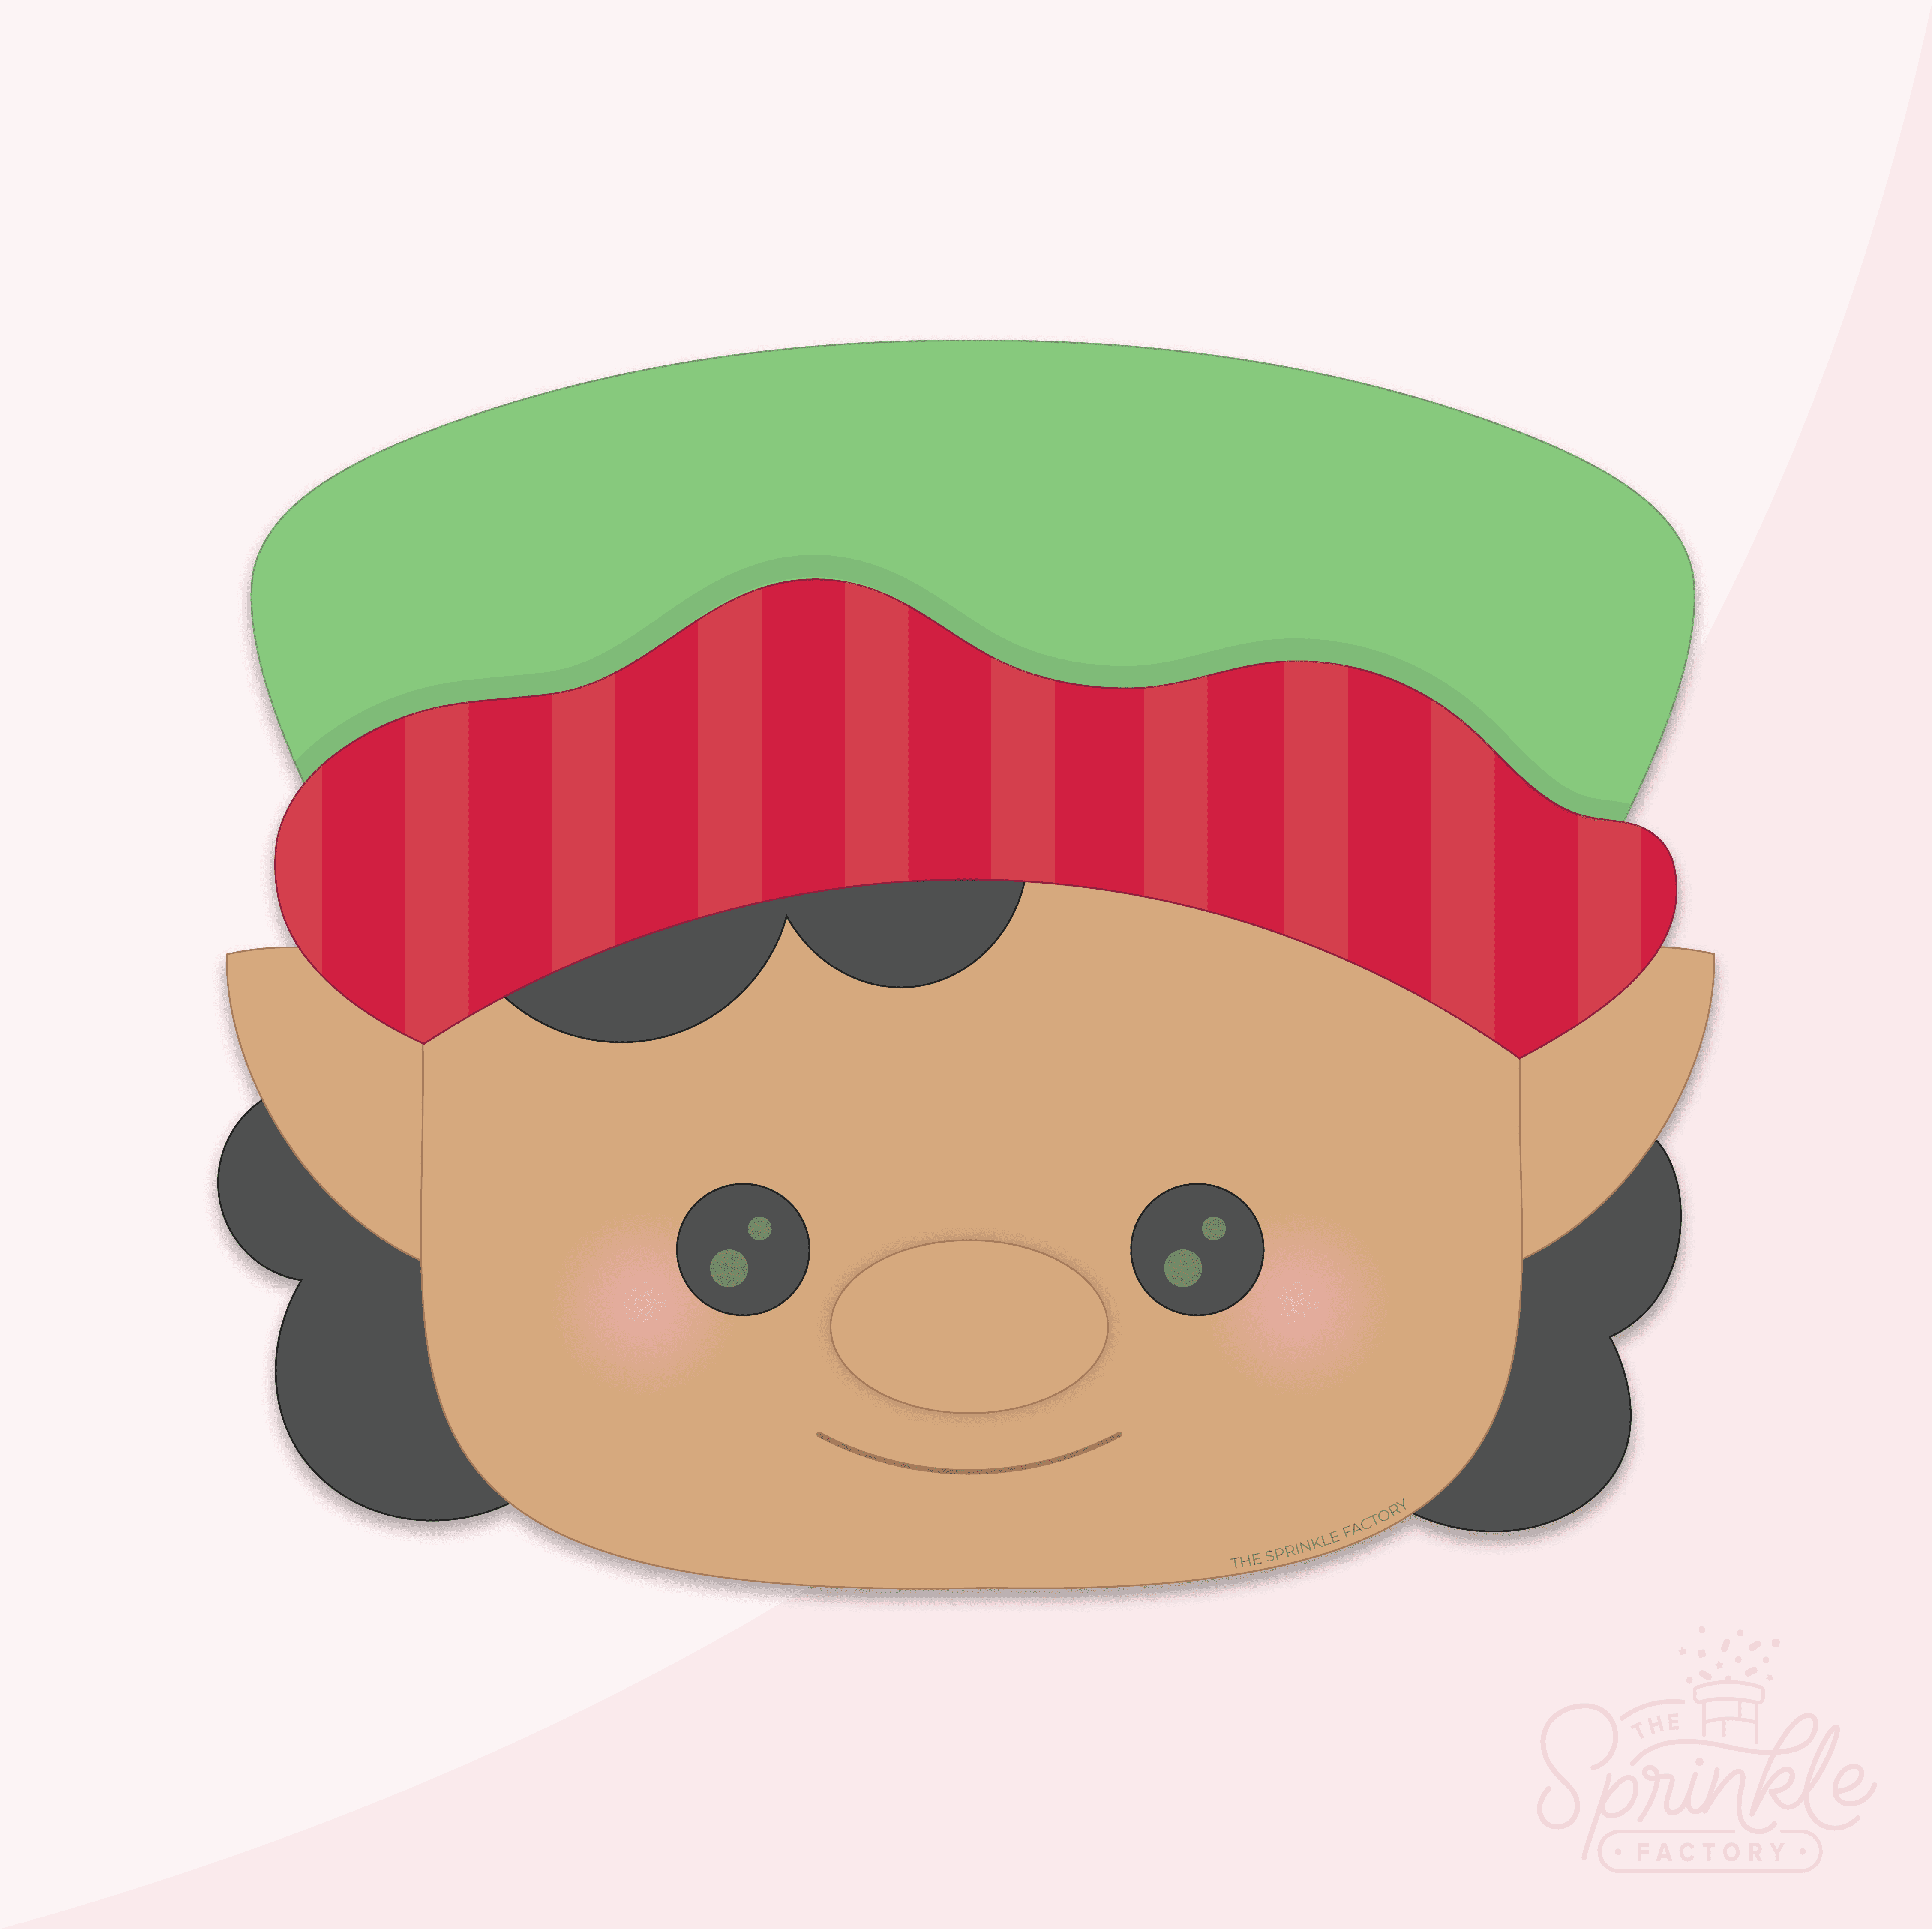 Clipart of a darker skin boy with black hair wearing a green hat with red stripped brim and pointed elf ears.